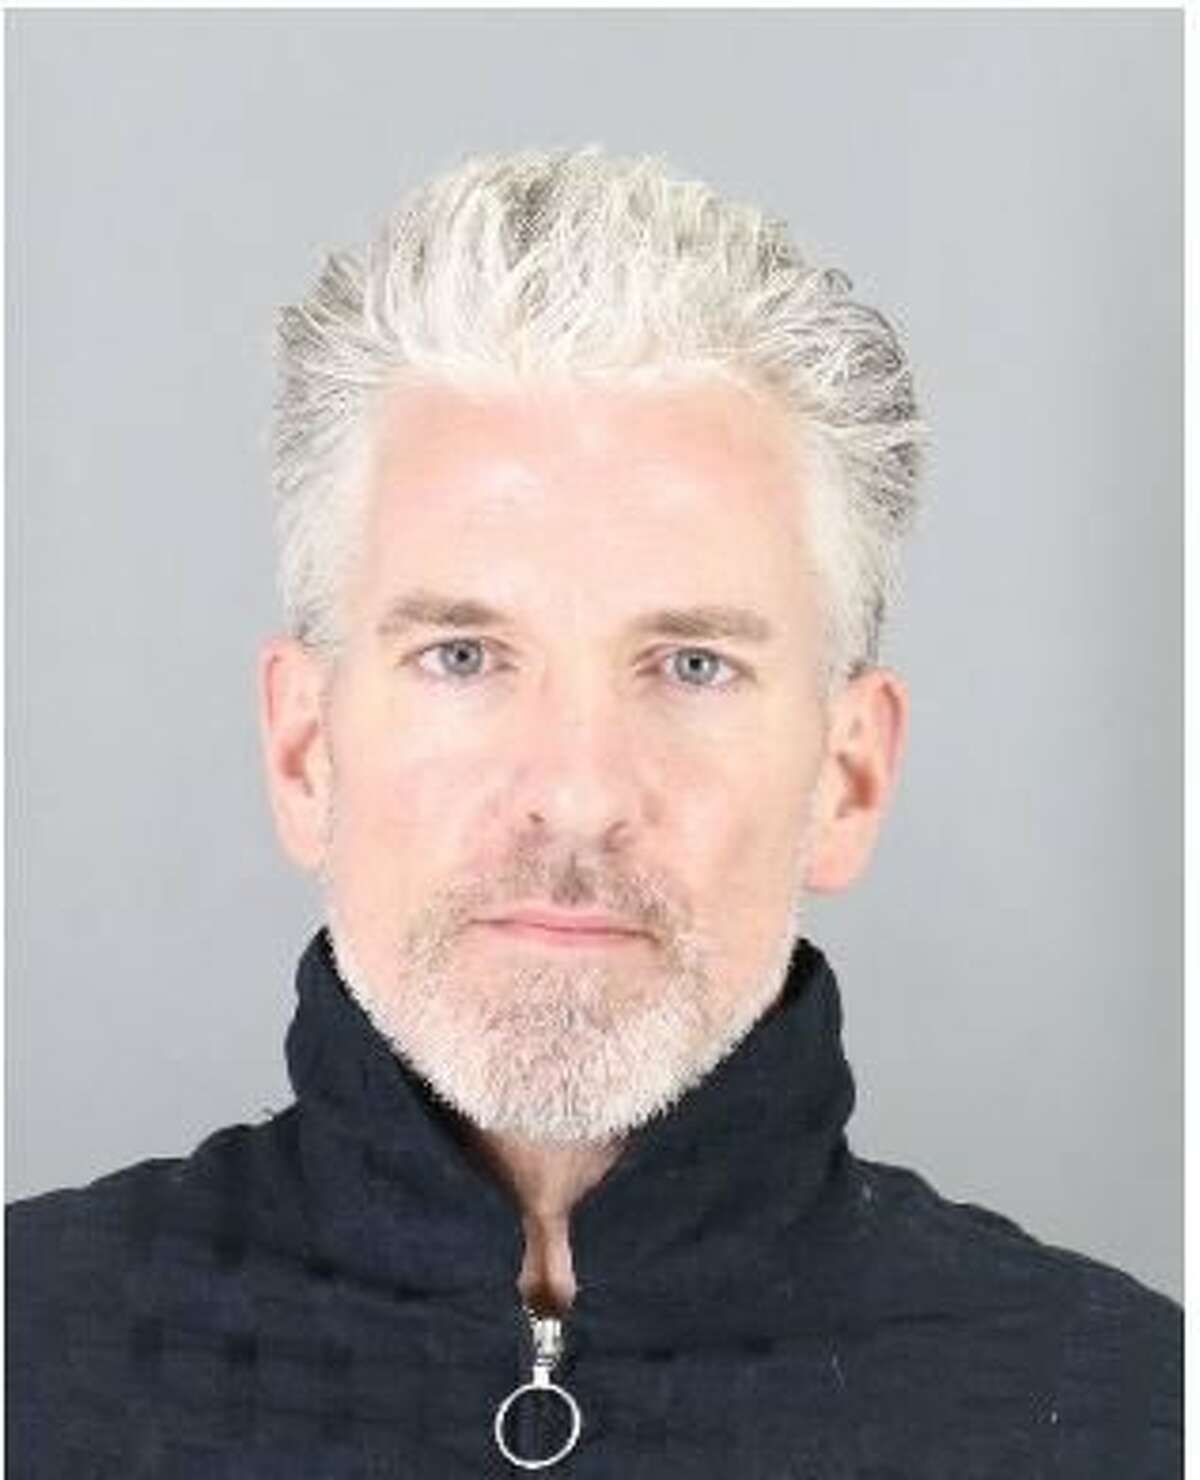 Dermot O’Sullivan, 48, is accused of walking into the SFO Terminal 3 baggage claim area on February 17, 2019 and swiping a case from the rotating carousel, which was packed with a Glock 9mm pistol, two magazines, 20 rounds of ammunition, two flashlights and a firearm holster, according to the San Francisco Police Department.